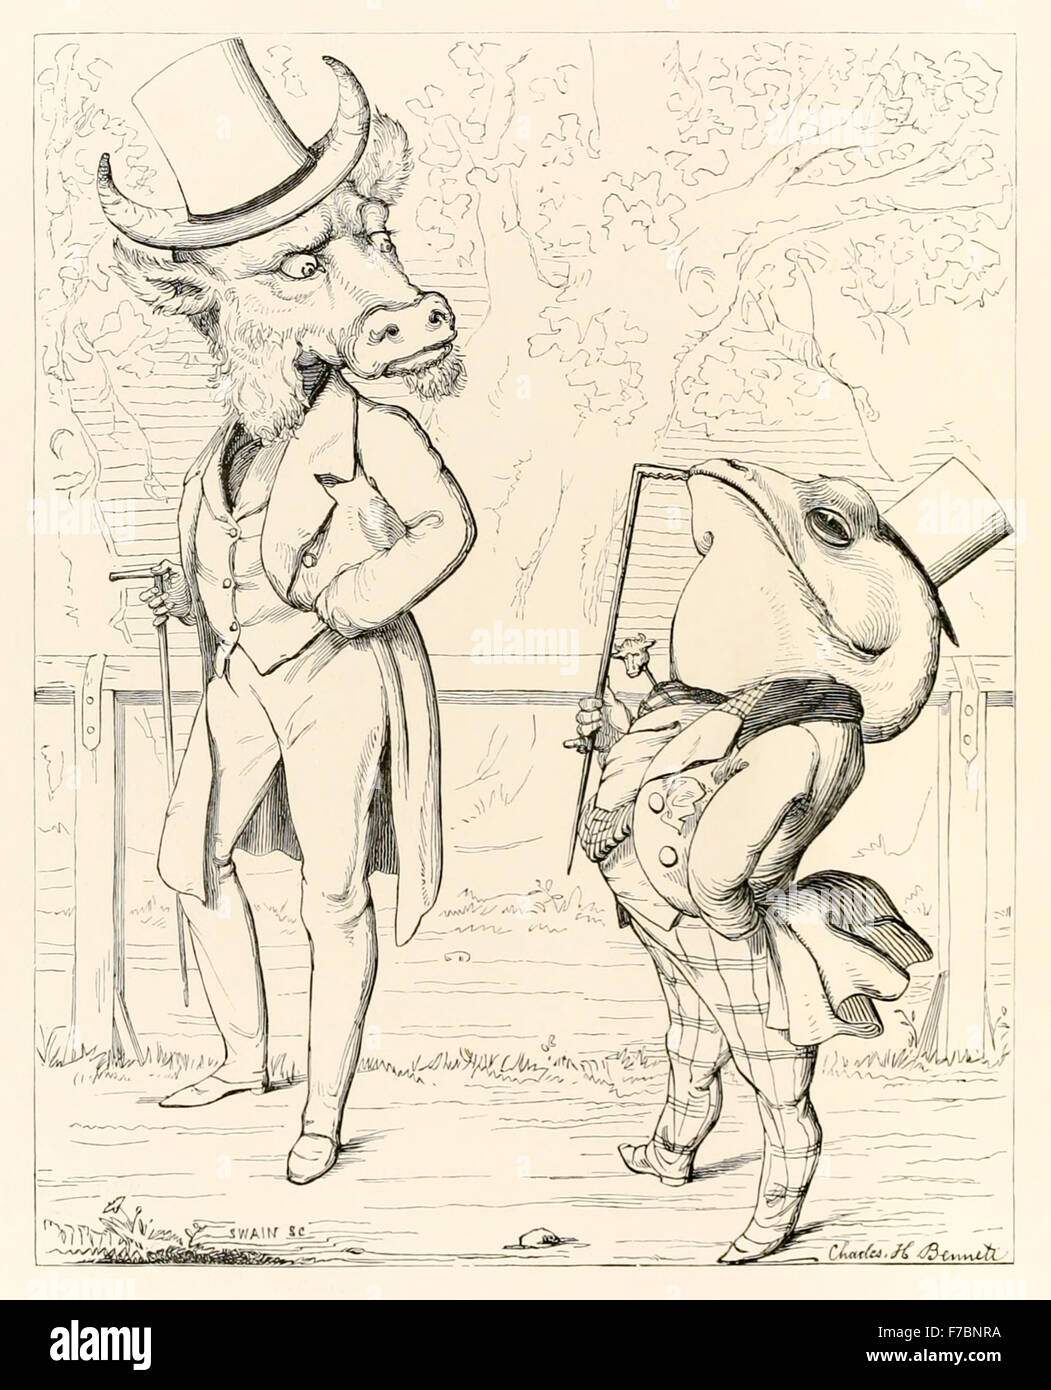 'The Fox and the Ox' from 'The Fables of Aesop and Others Translated Into Human Nature' illustrated by Charles H. Bennett (1828-1867), a frog tries to inflate itself to the size of an ox, but bursts in the attempt. See description for more information. Stock Photo